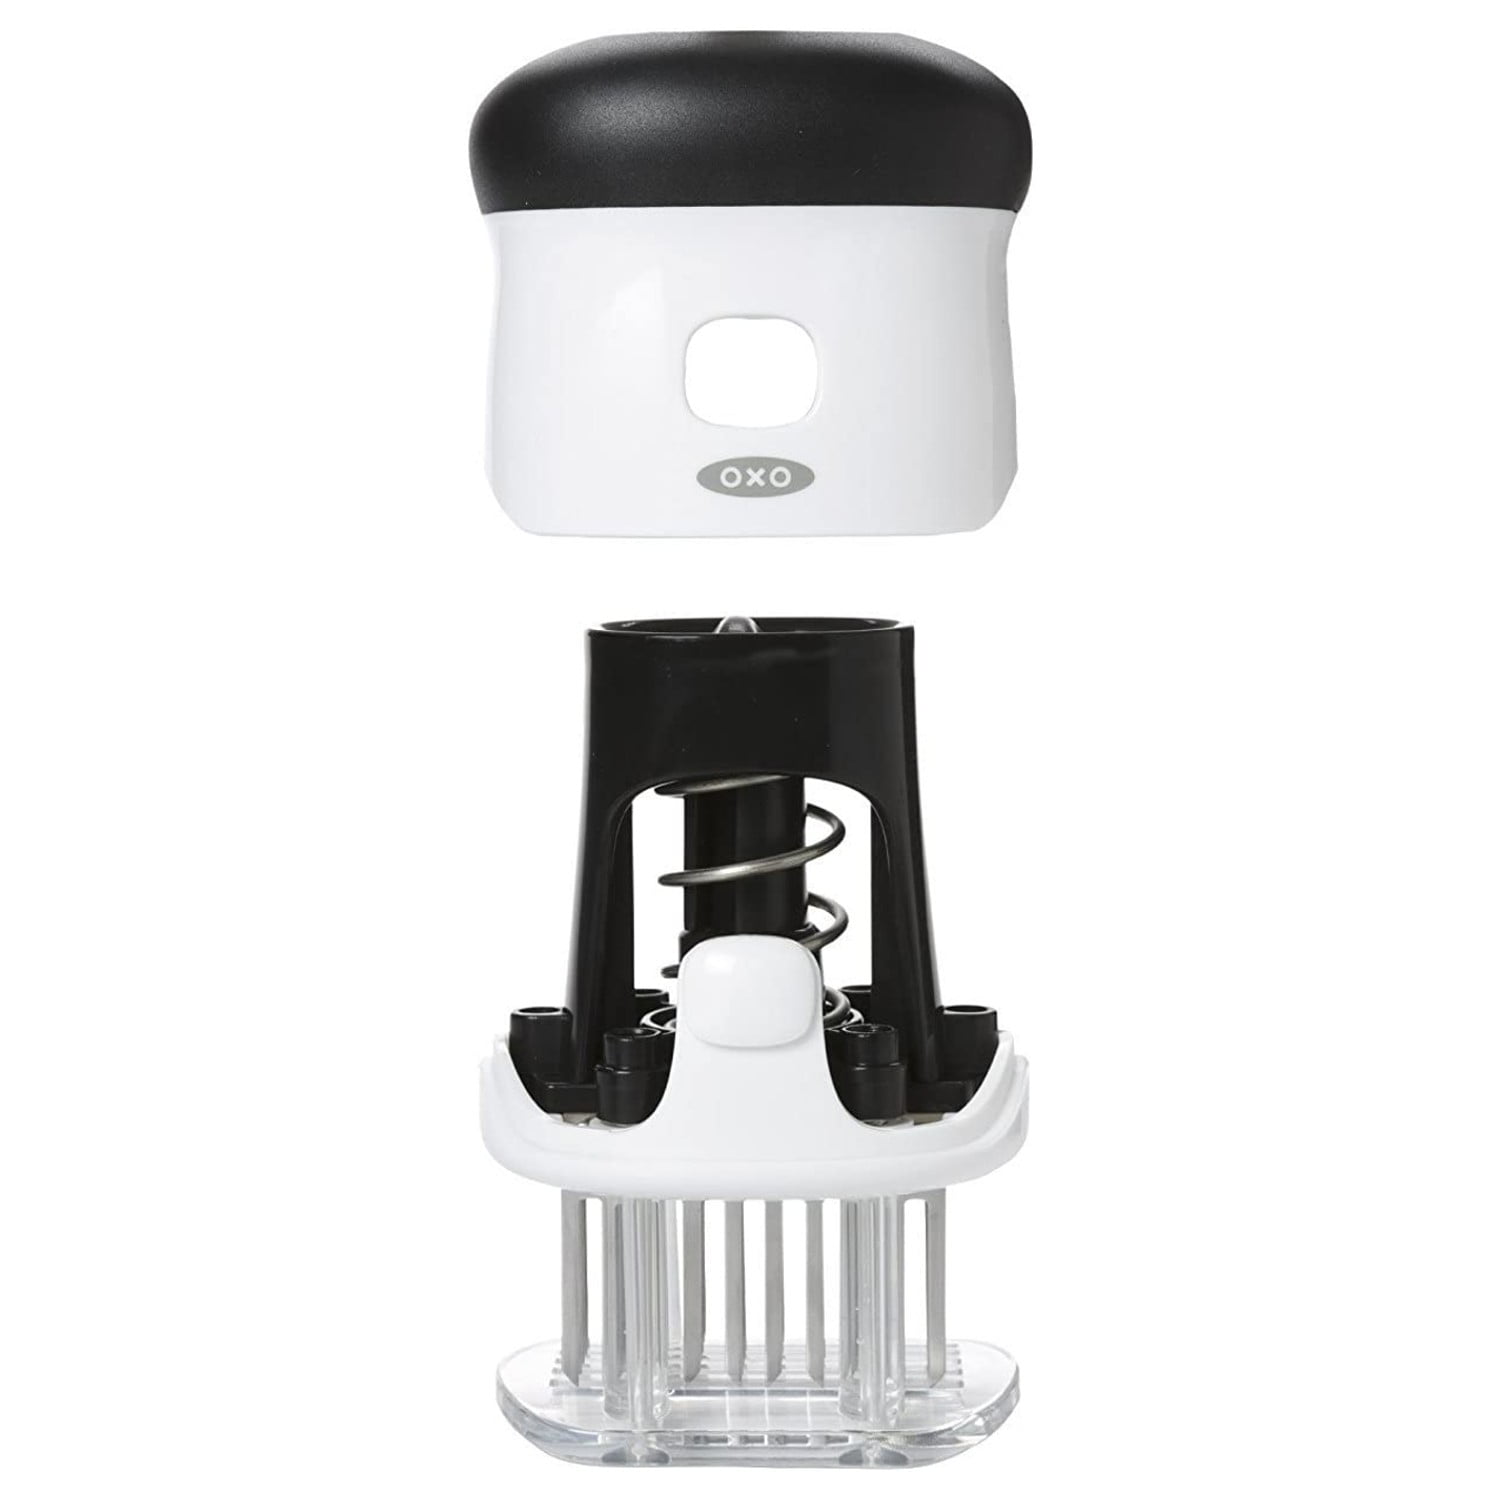 Oxo Meat Tenderizer - The Peppermill